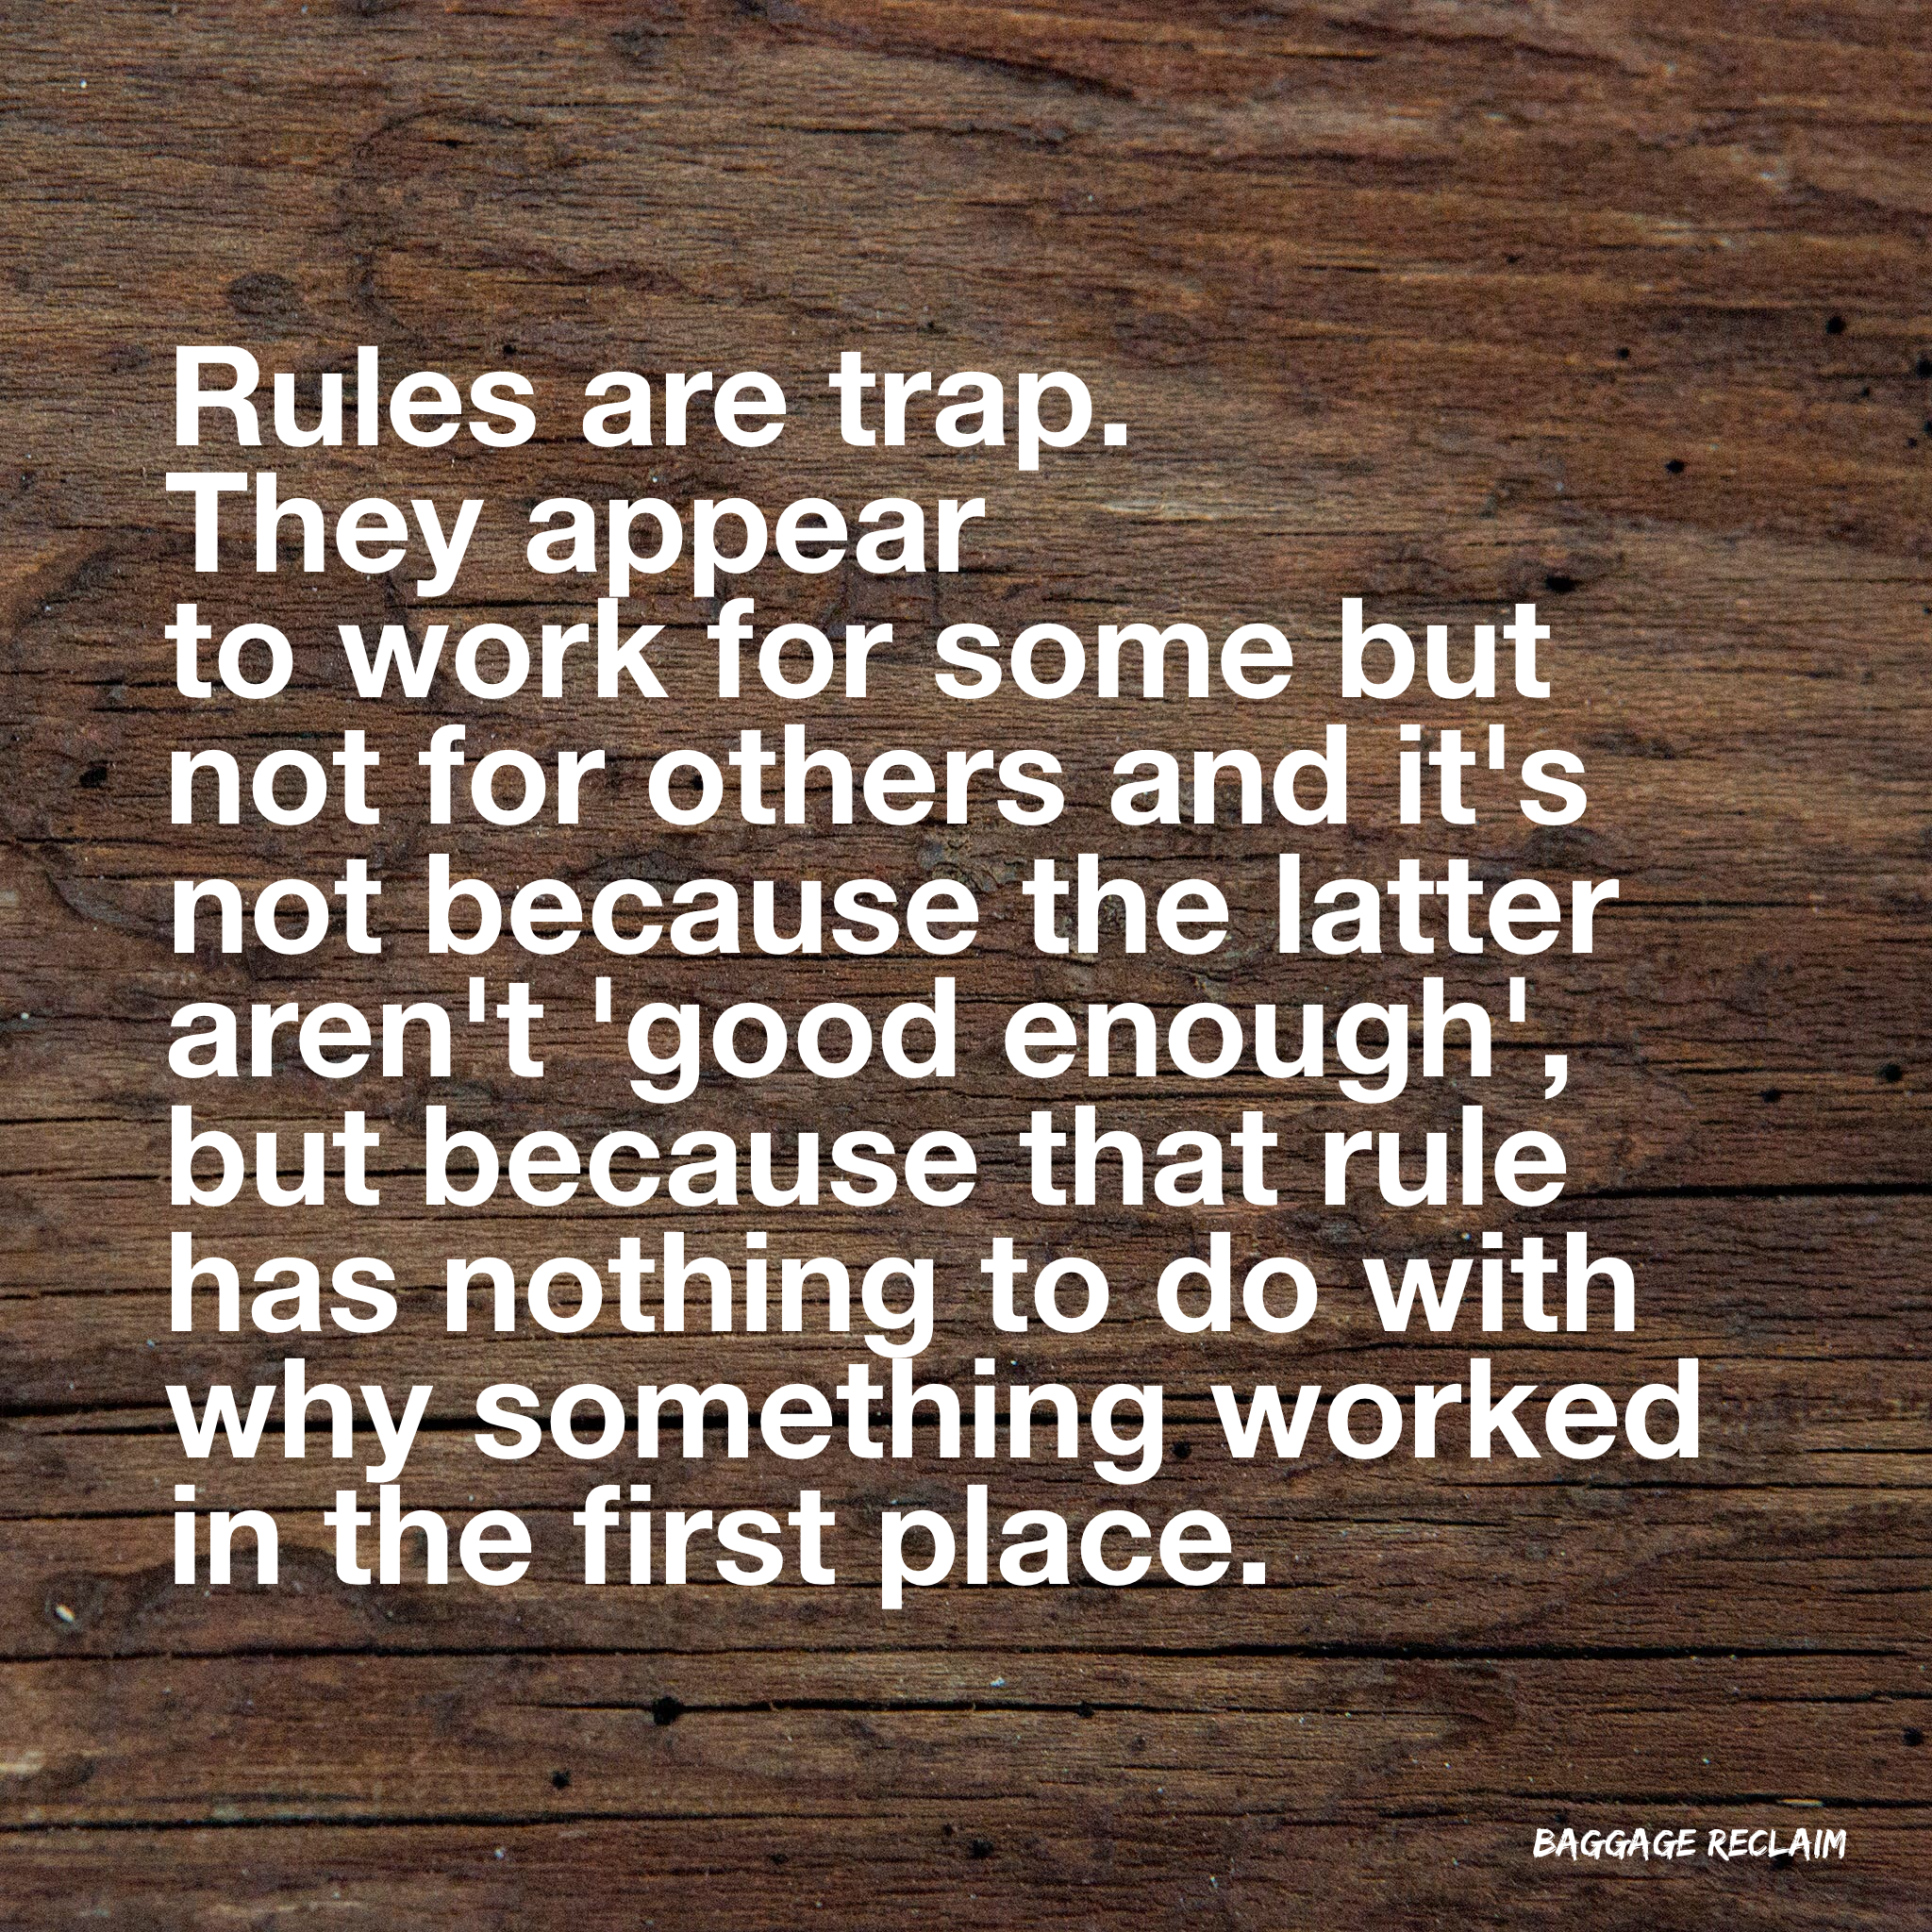 Rules are a trap. They appear to work for some but not for others and it's not because the latter aren't 'good enough', but because that rule has nothing to do with why something worked in the first place.